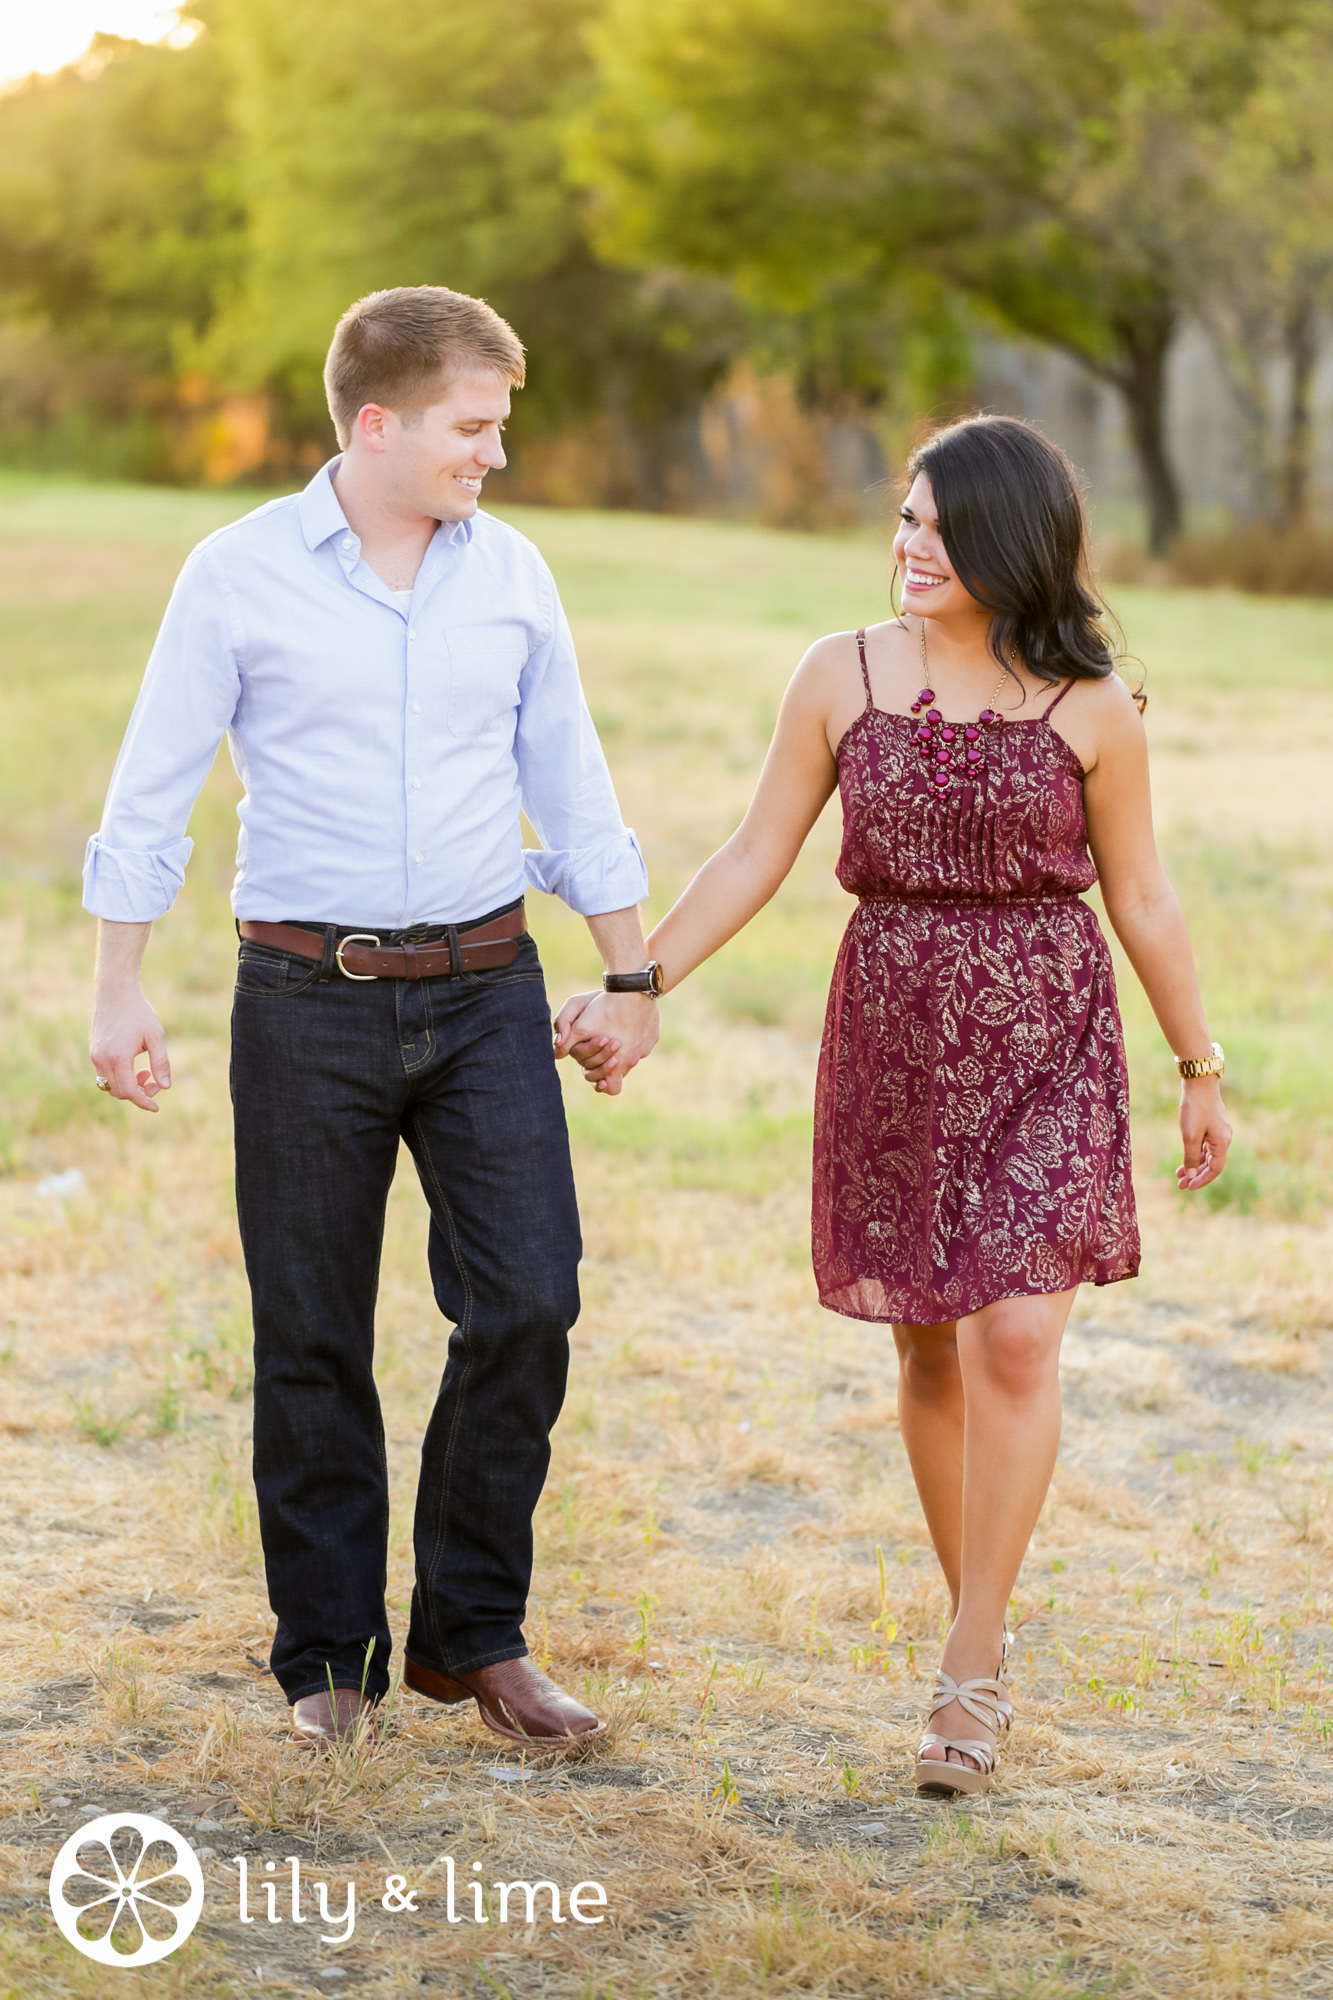 dressy engagement outfit ideas